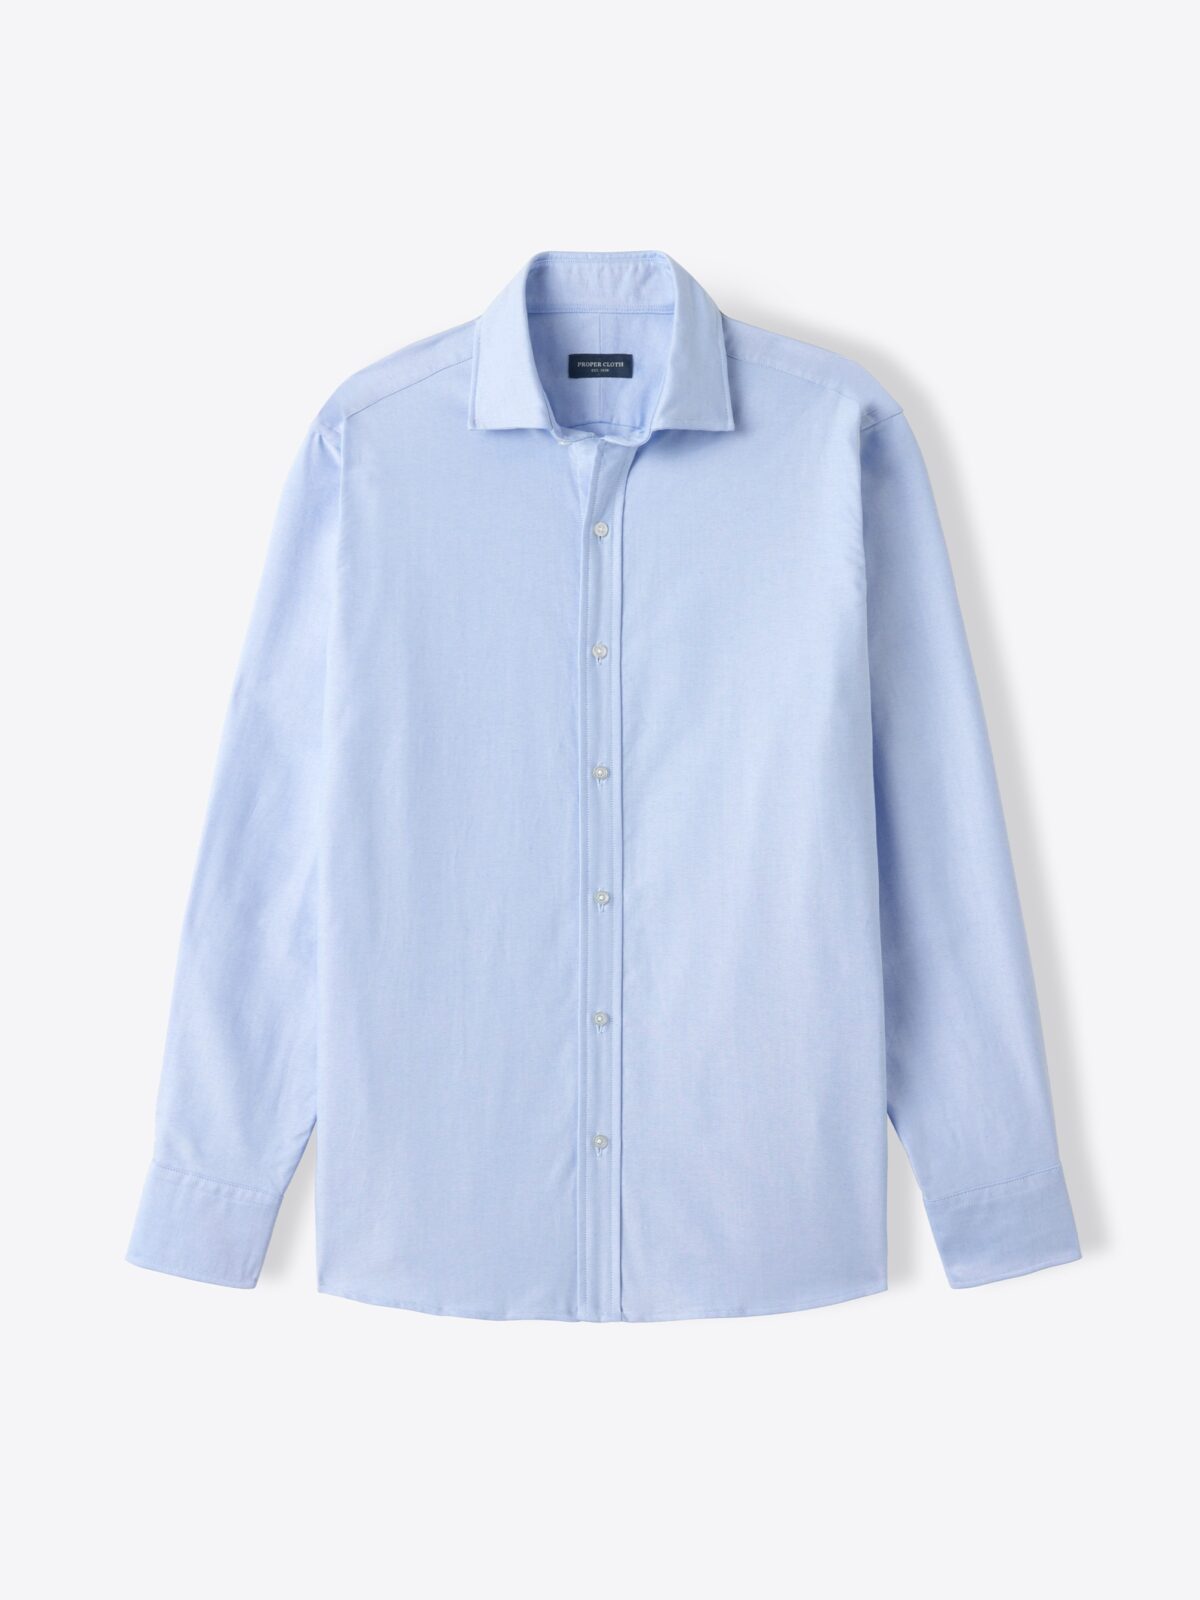 Men's Comfort Stretch Oxford Shirt, Slightly Fitted Untucked Fit